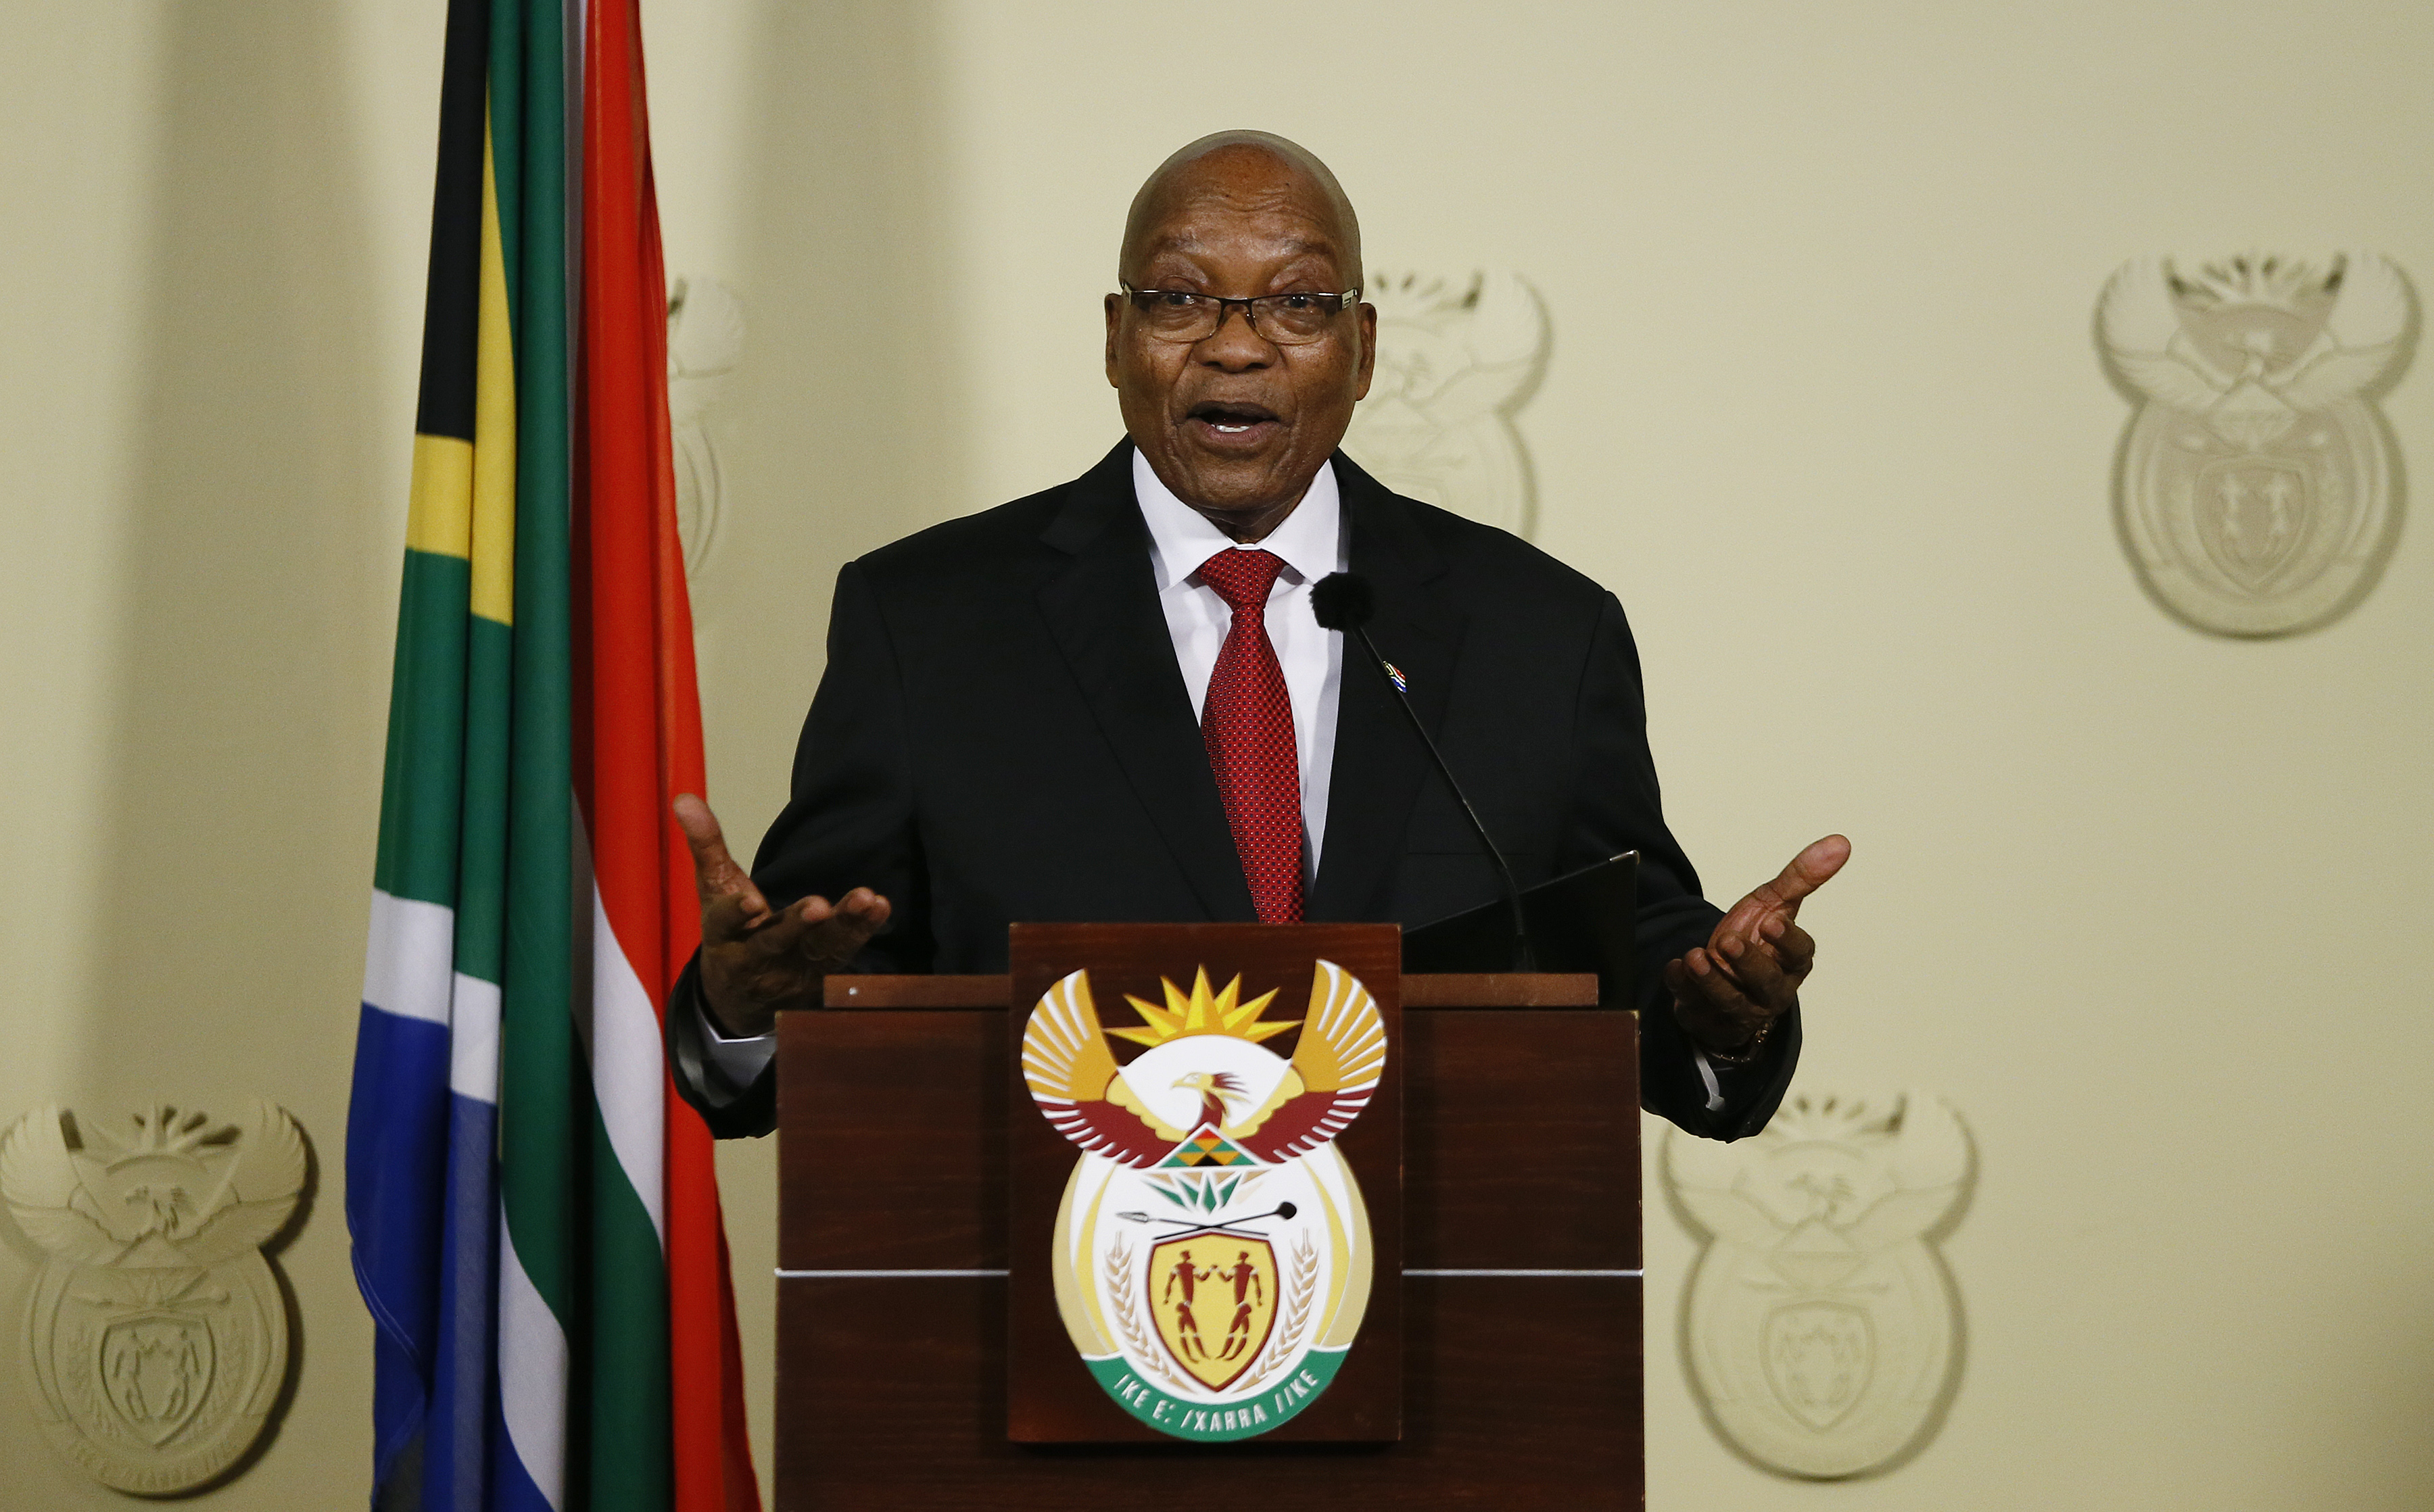 President of South Africa Jacob Zuma addresses the nation at the Union Buildings in Pretoria on February 14, 2018. (PHILL MAGAKOE&mdash;AFP/Getty Images)